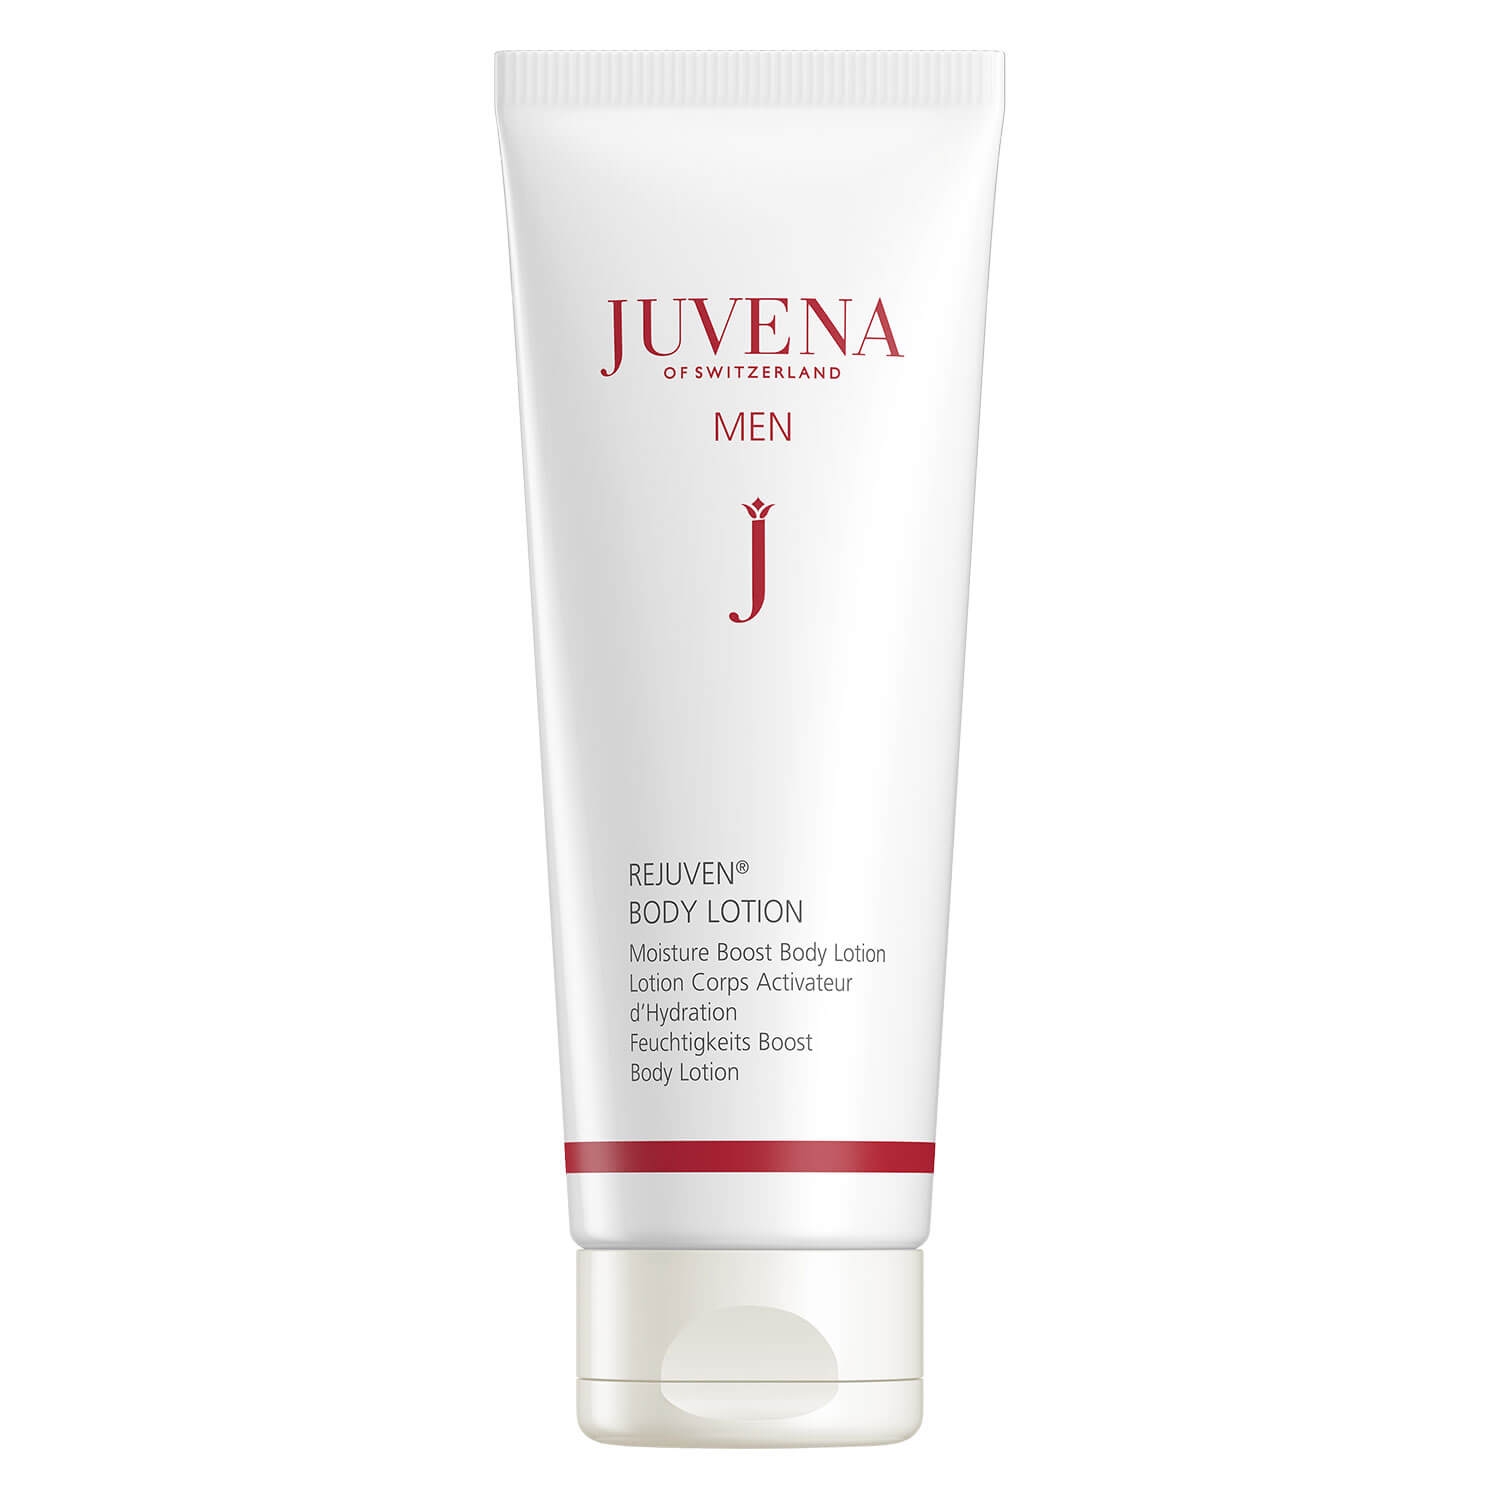 Product image from Rejuven - Moisture Boost Body Lotion